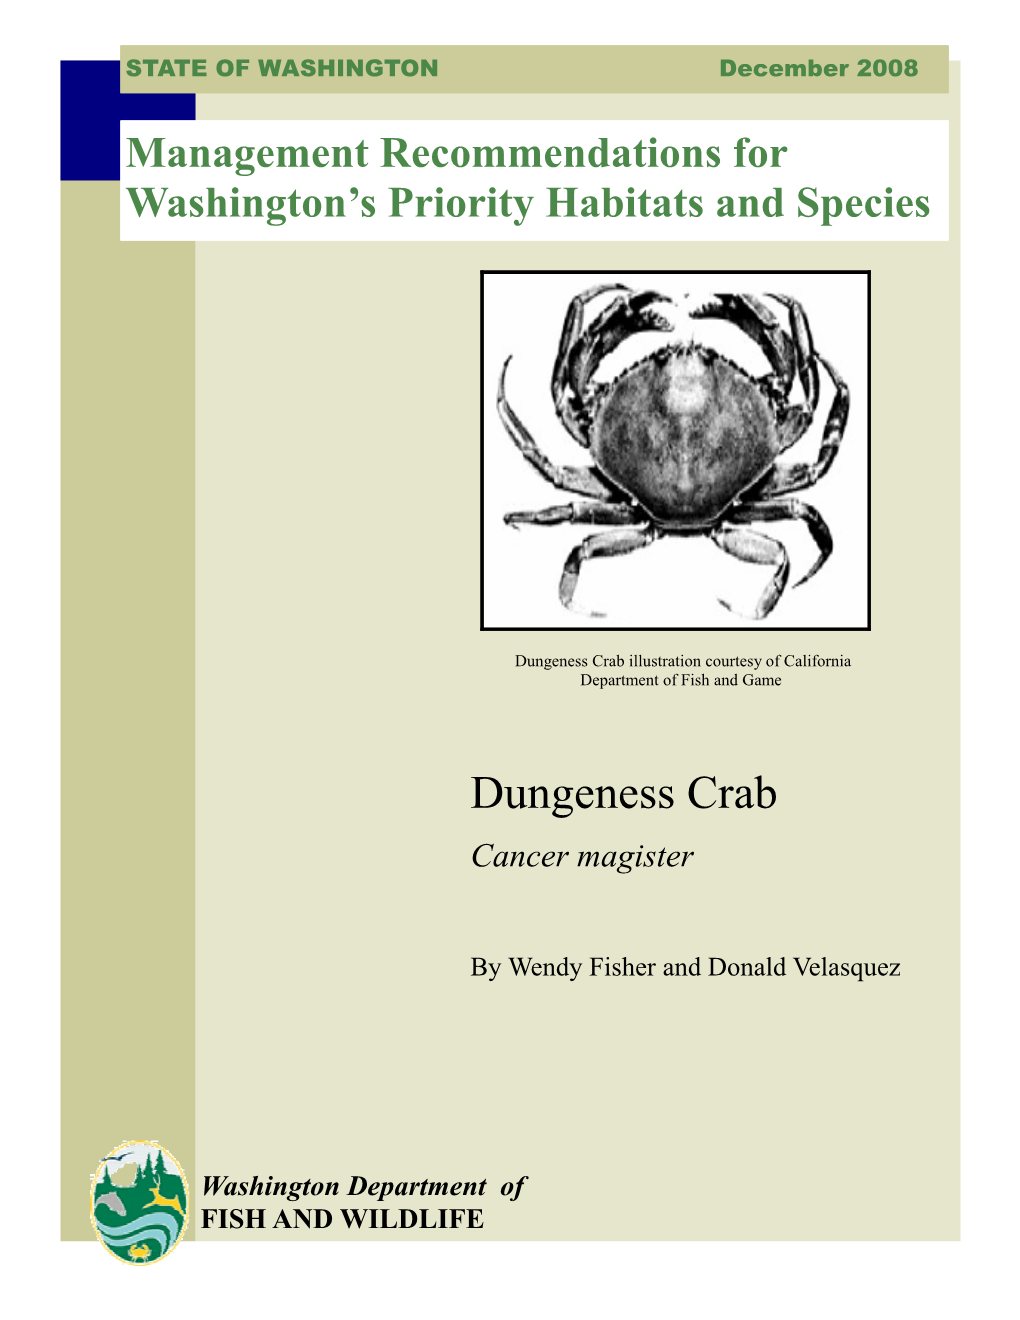 Dungeness Crab (Cancer Magister) Fishery